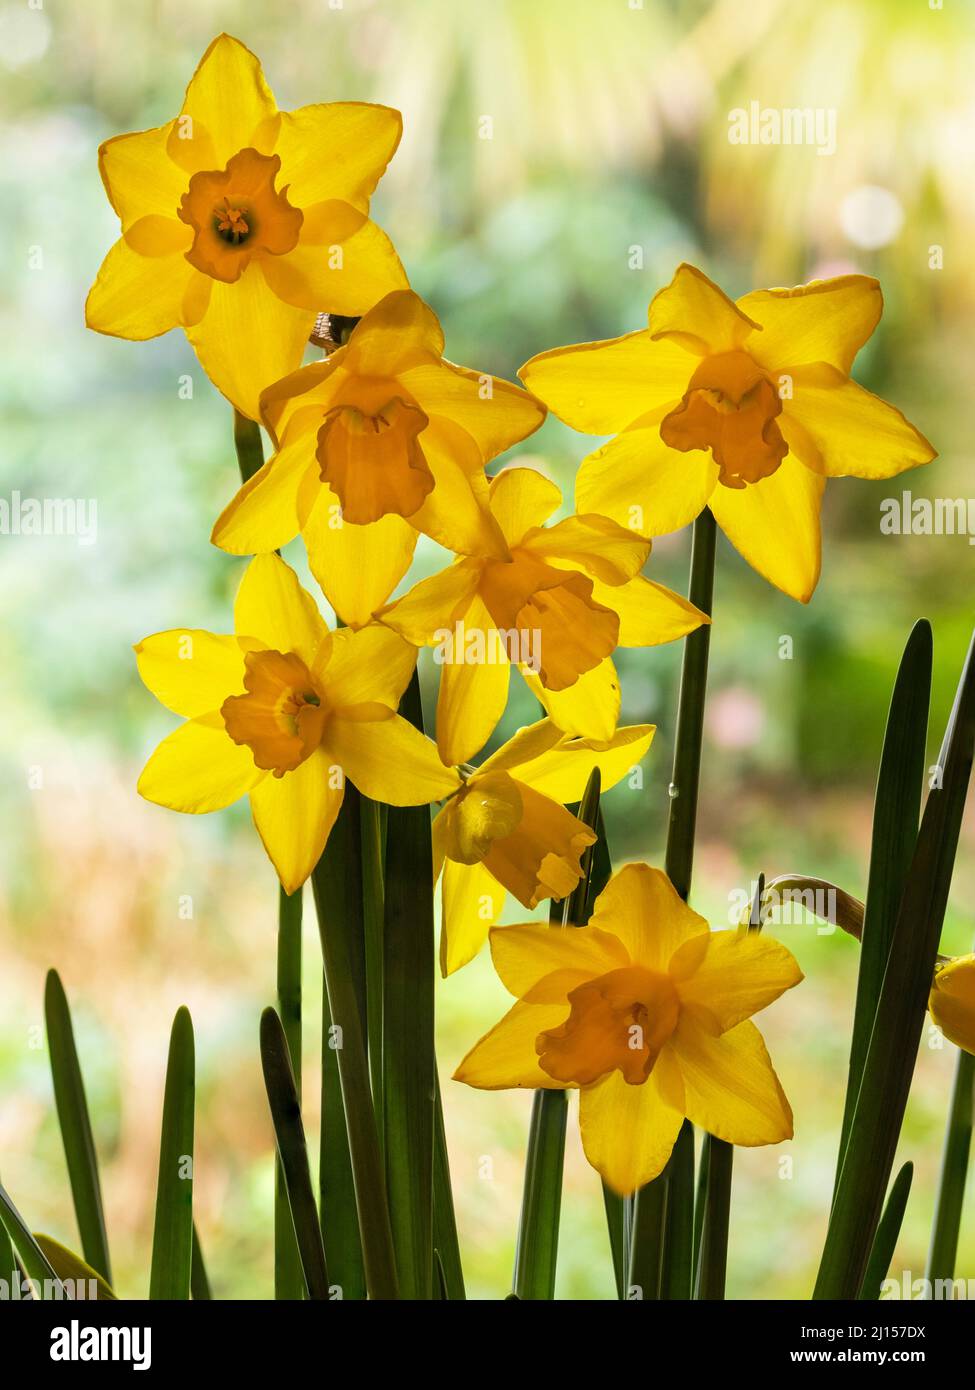 Fragrant yellow trumpets of the early flowering jonquil type daffodil, Narcissus 'Sweetness' Stock Photo